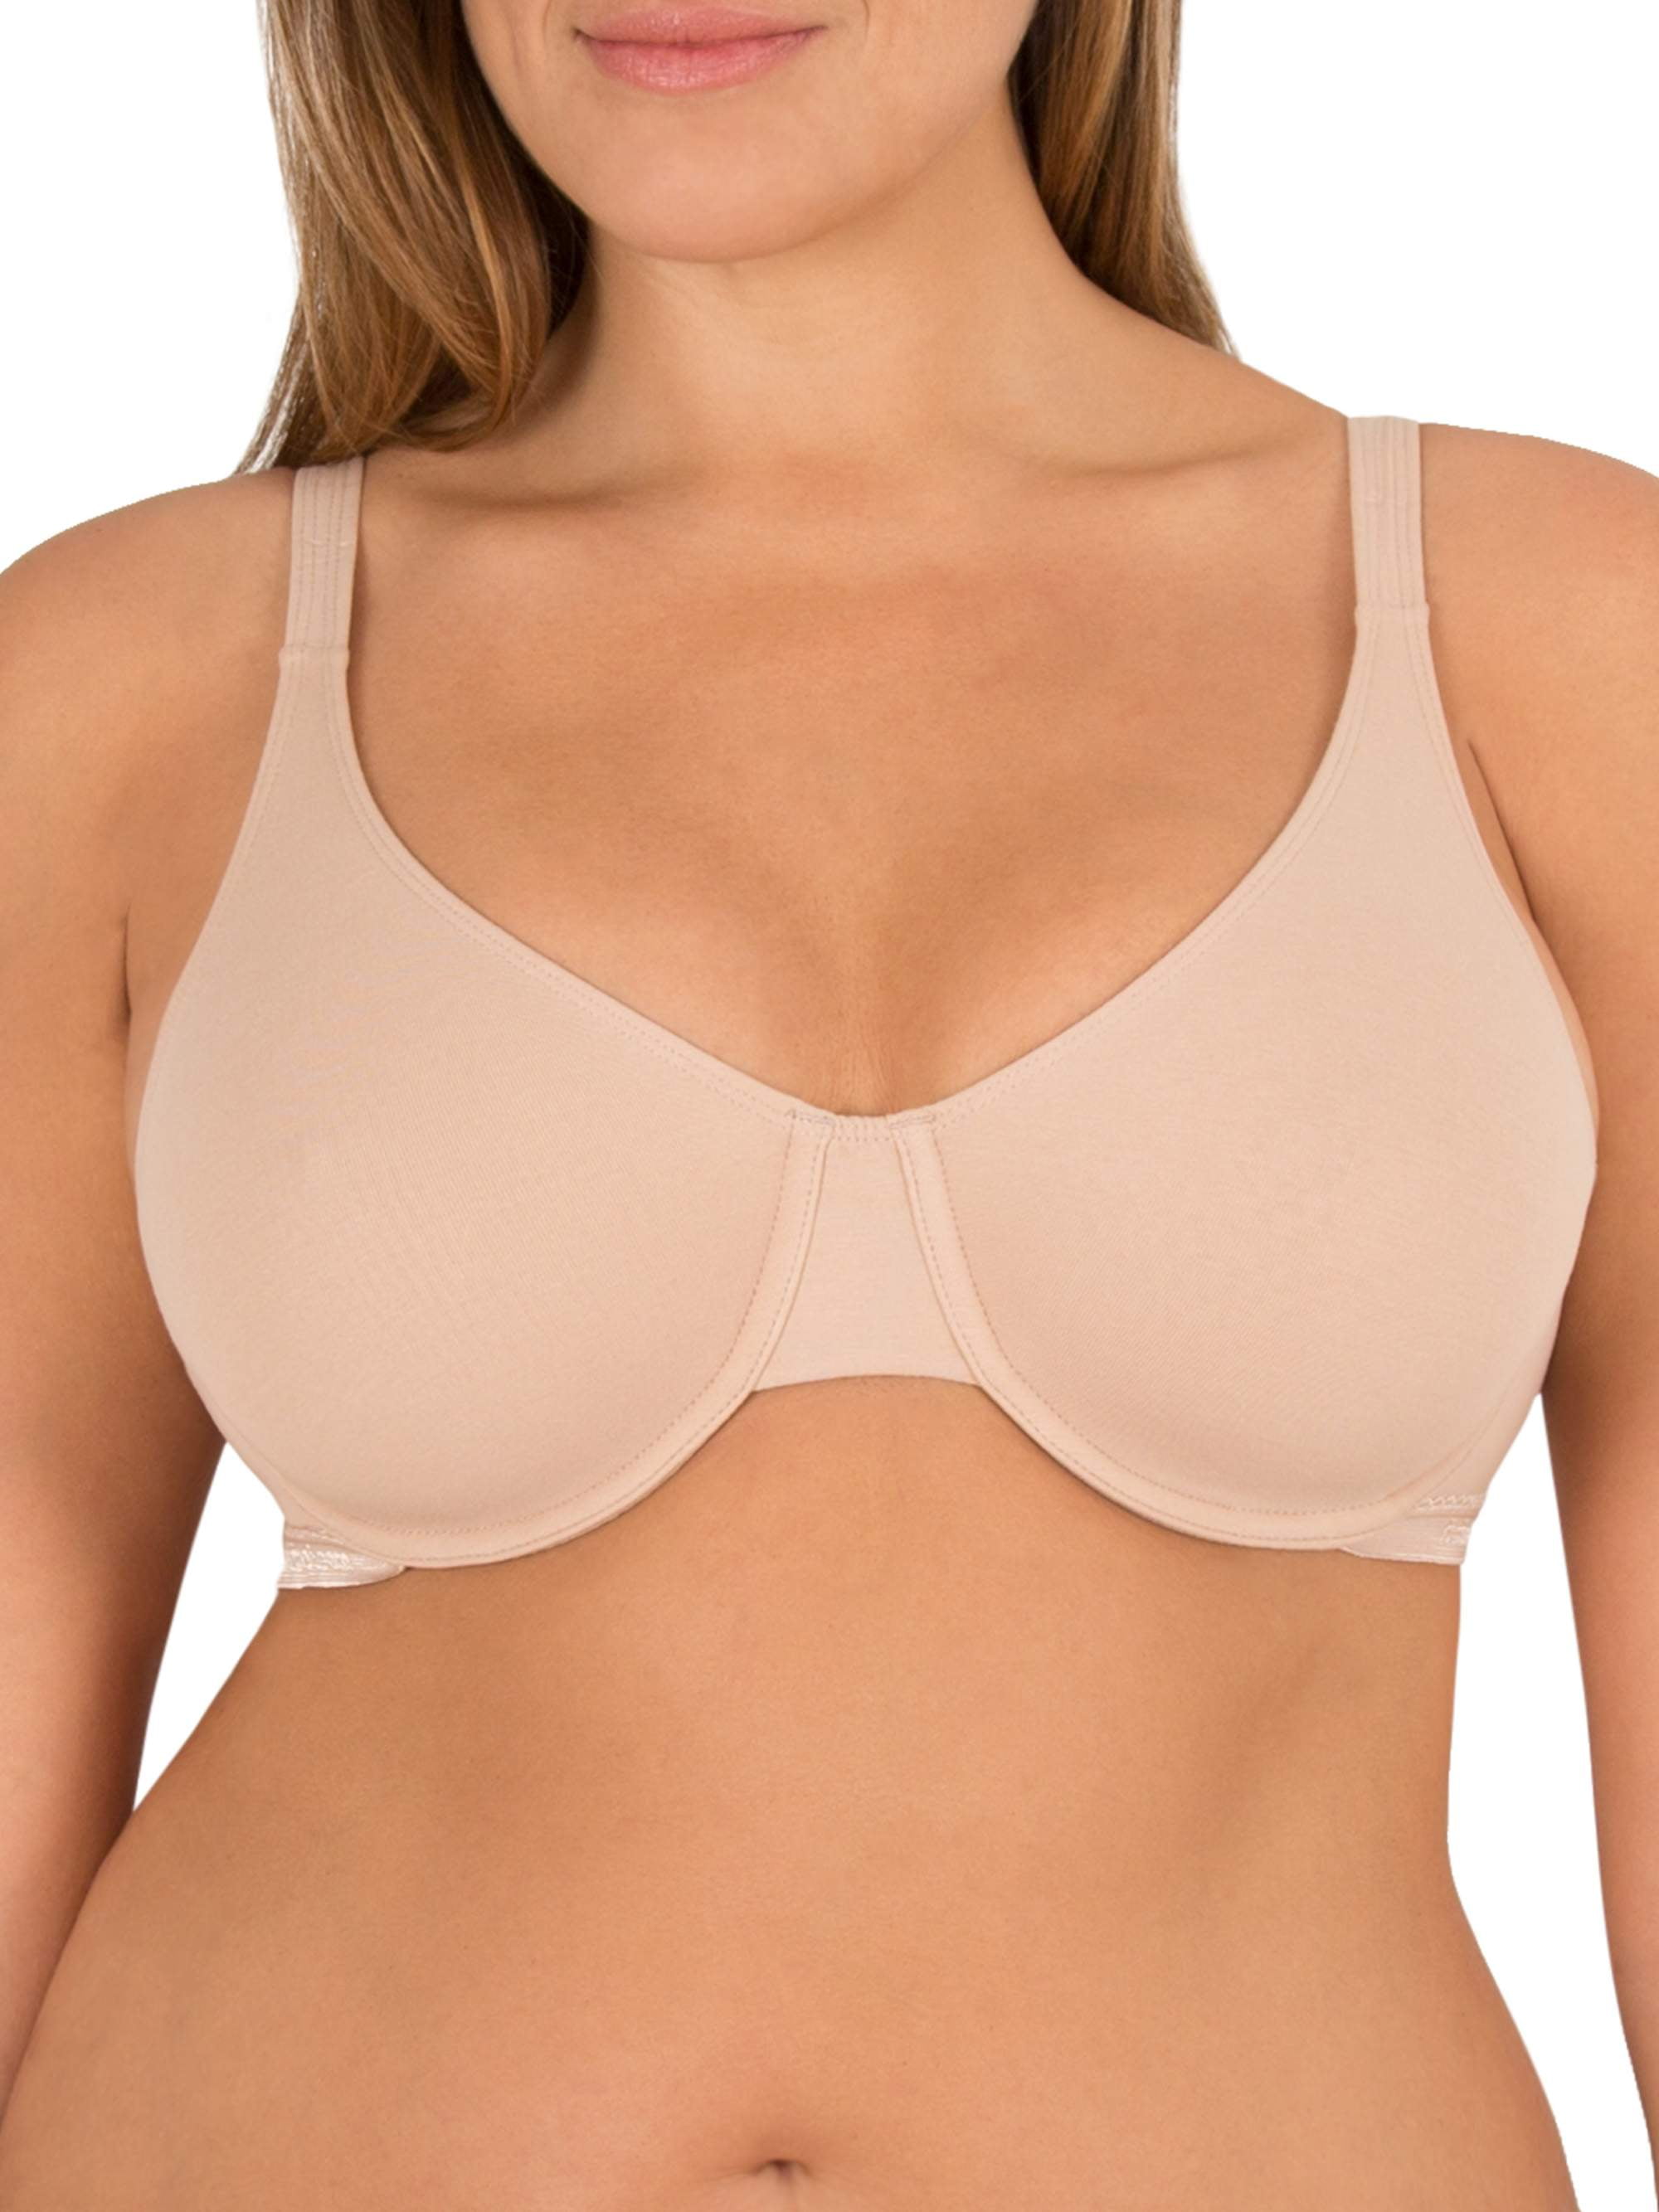 Buy Fruit of the Loom Women's Cotton Stretch Extreme Comfort Bra